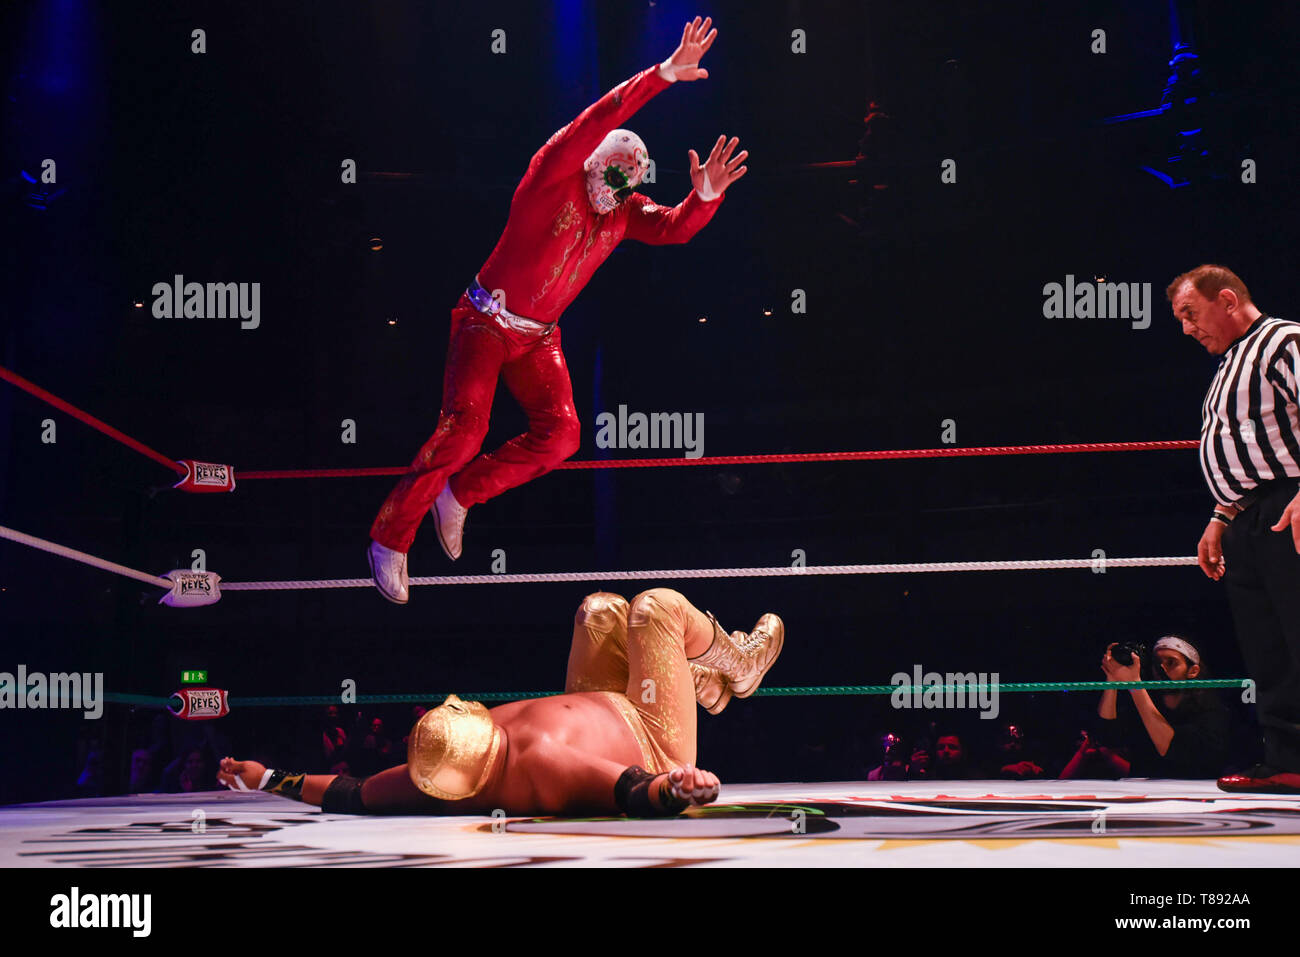 London, UK.  11 May 2019. Participants in a men's bout during 'The Greatest Show of Lucha Libre' at the Roundhouse in Camden which has been transformed into a classic Mexican arena for one day only.  Lucha Libre is a unique form of Mexican professional wrestling characterised by colourful masks, elaborate costumes, acrobatic techniques and high-flying manoeuvres in which good battles evil through fierce and spectacular competition.  Credit: Stephen Chung / Alamy Live News Stock Photo